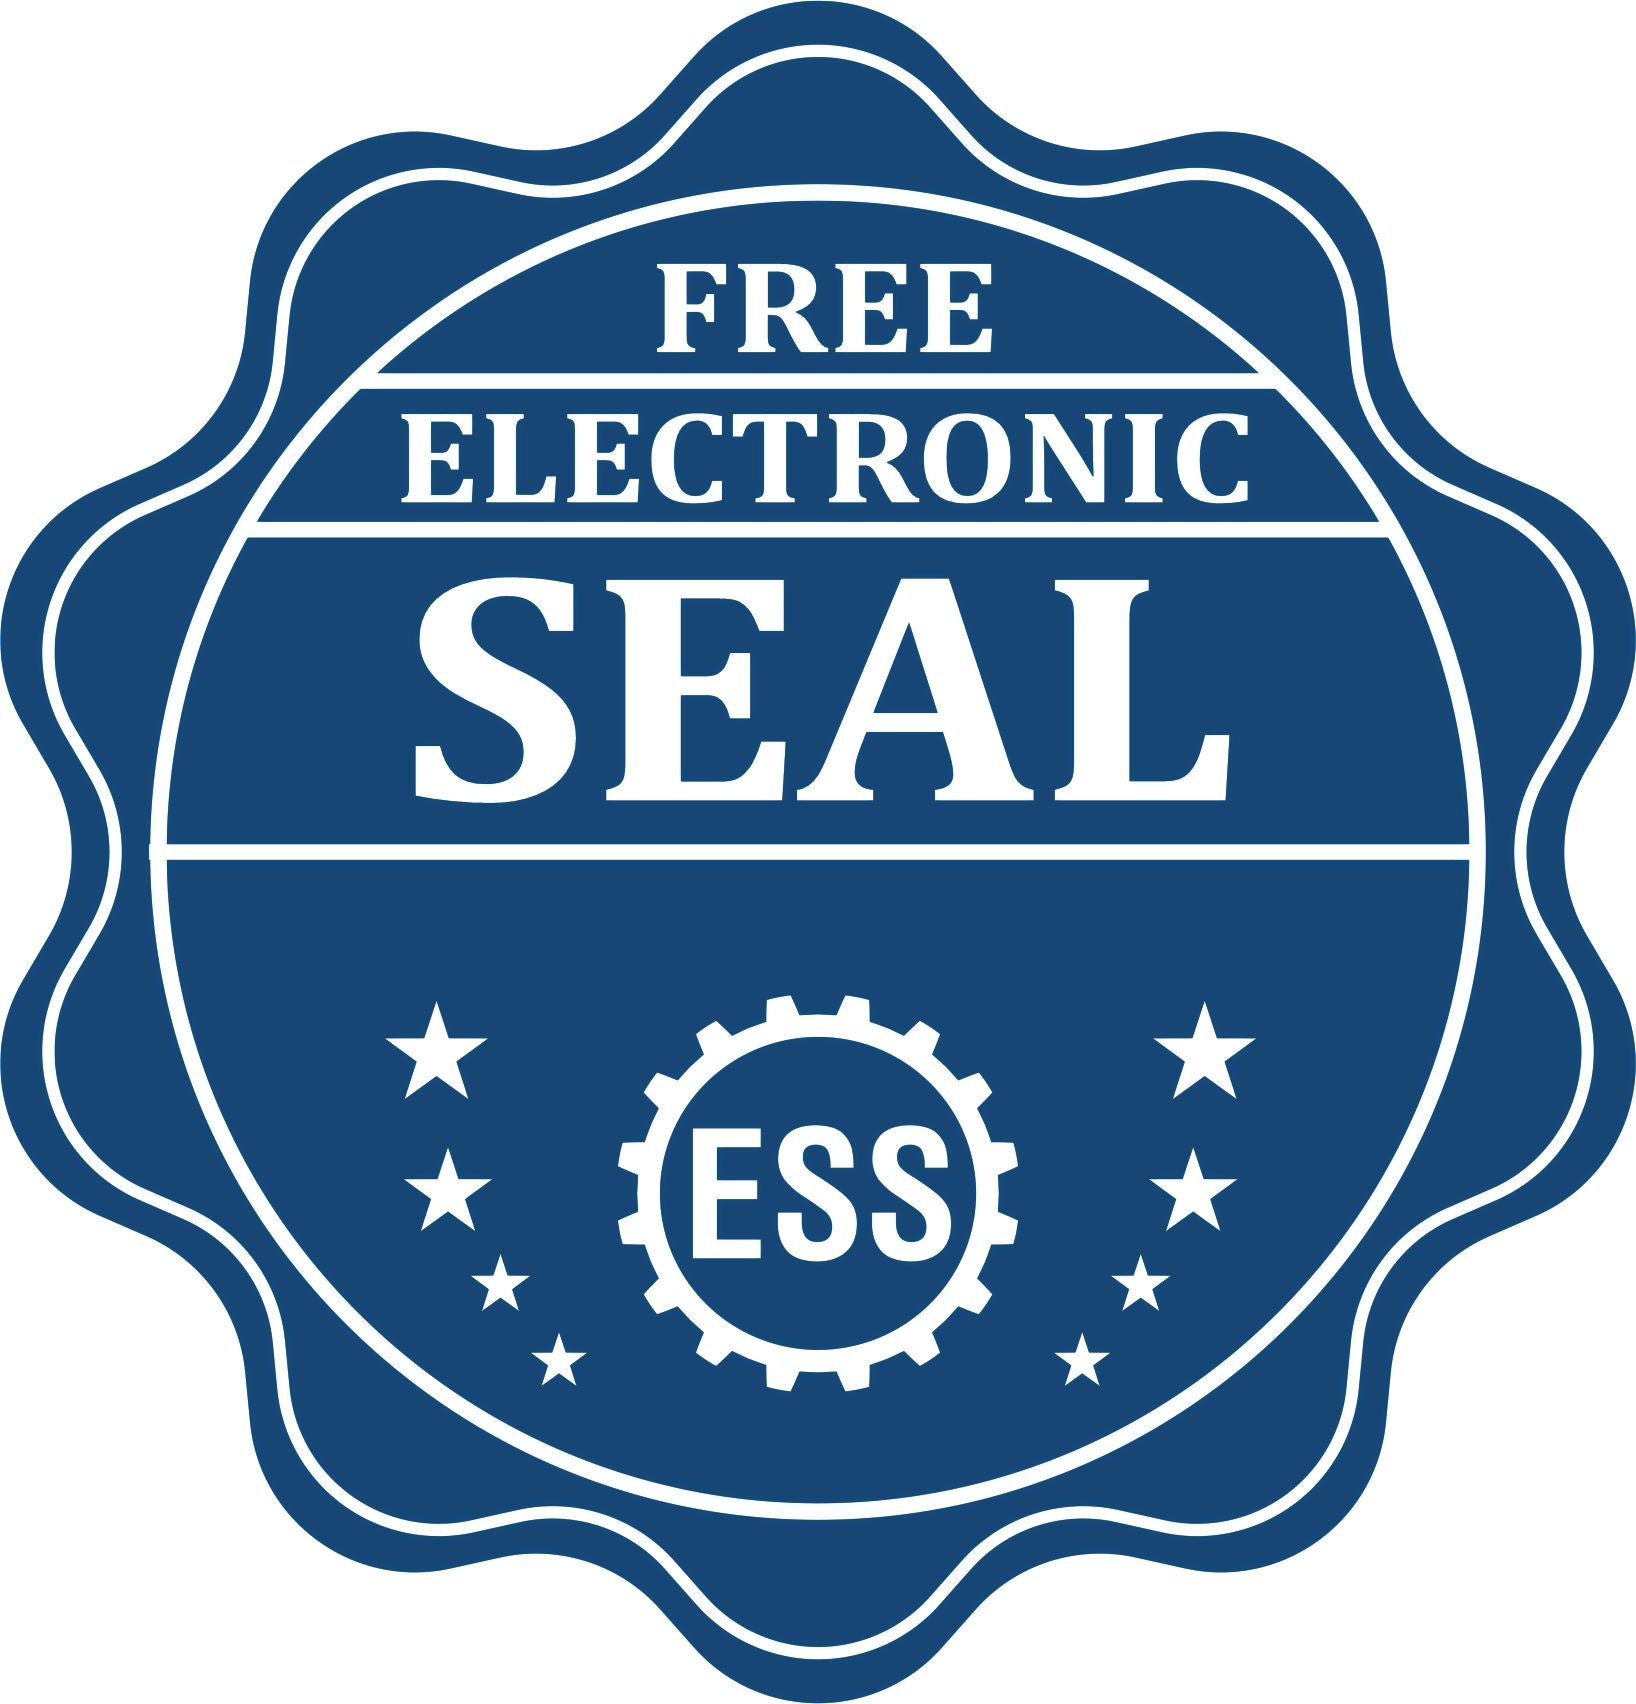 A badge showing a free electronic seal for the Gift Wyoming Engineer Seal with stars and the ESS gear on the emblem.